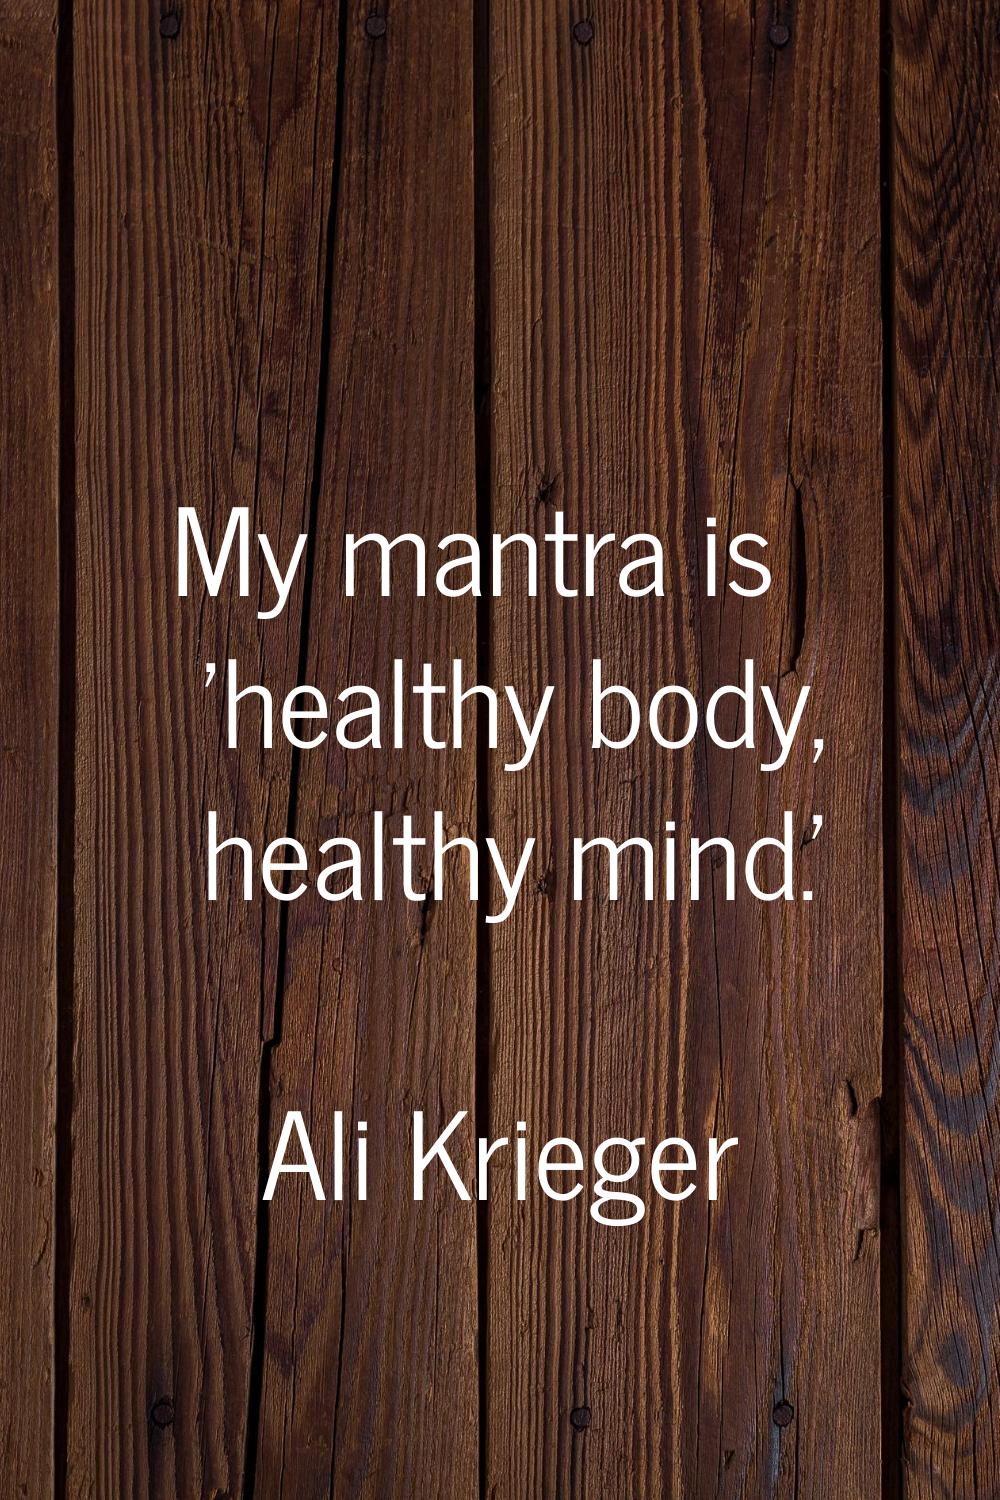 My mantra is 'healthy body, healthy mind.'